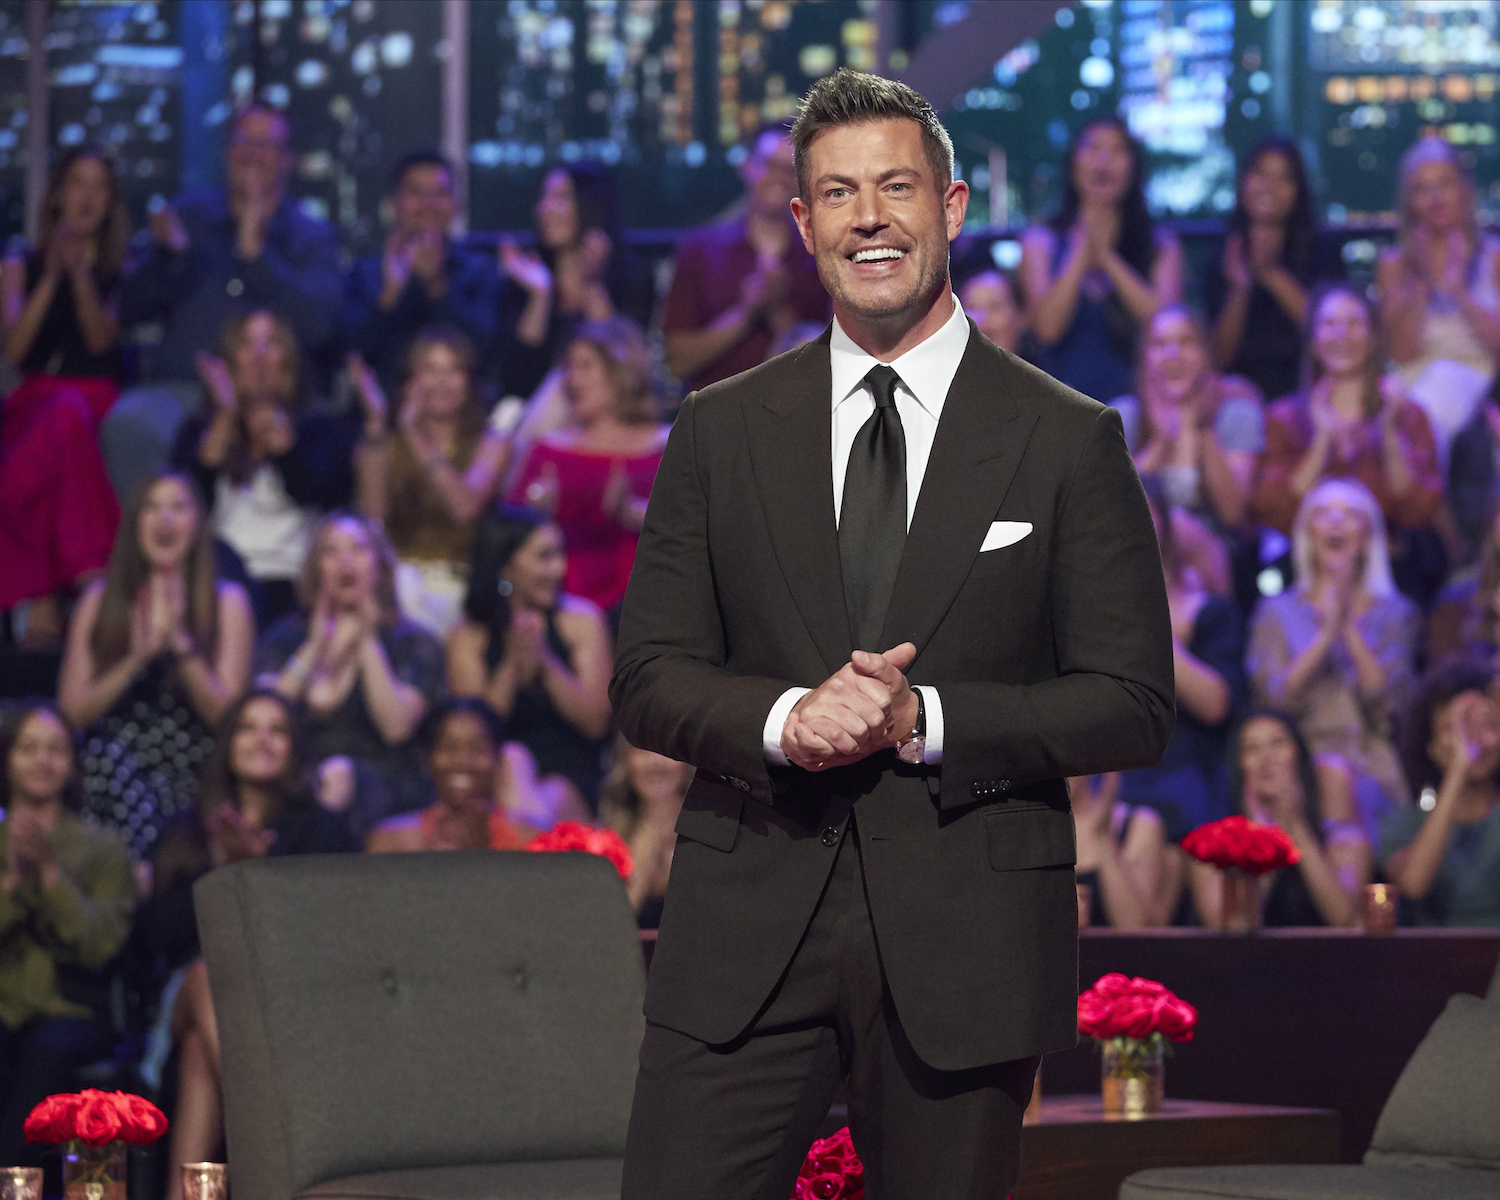 'The Bachelorette' free cruise vouchers were announced by host Jesse Palmer, seen here on the 'Men Tell All' stage.